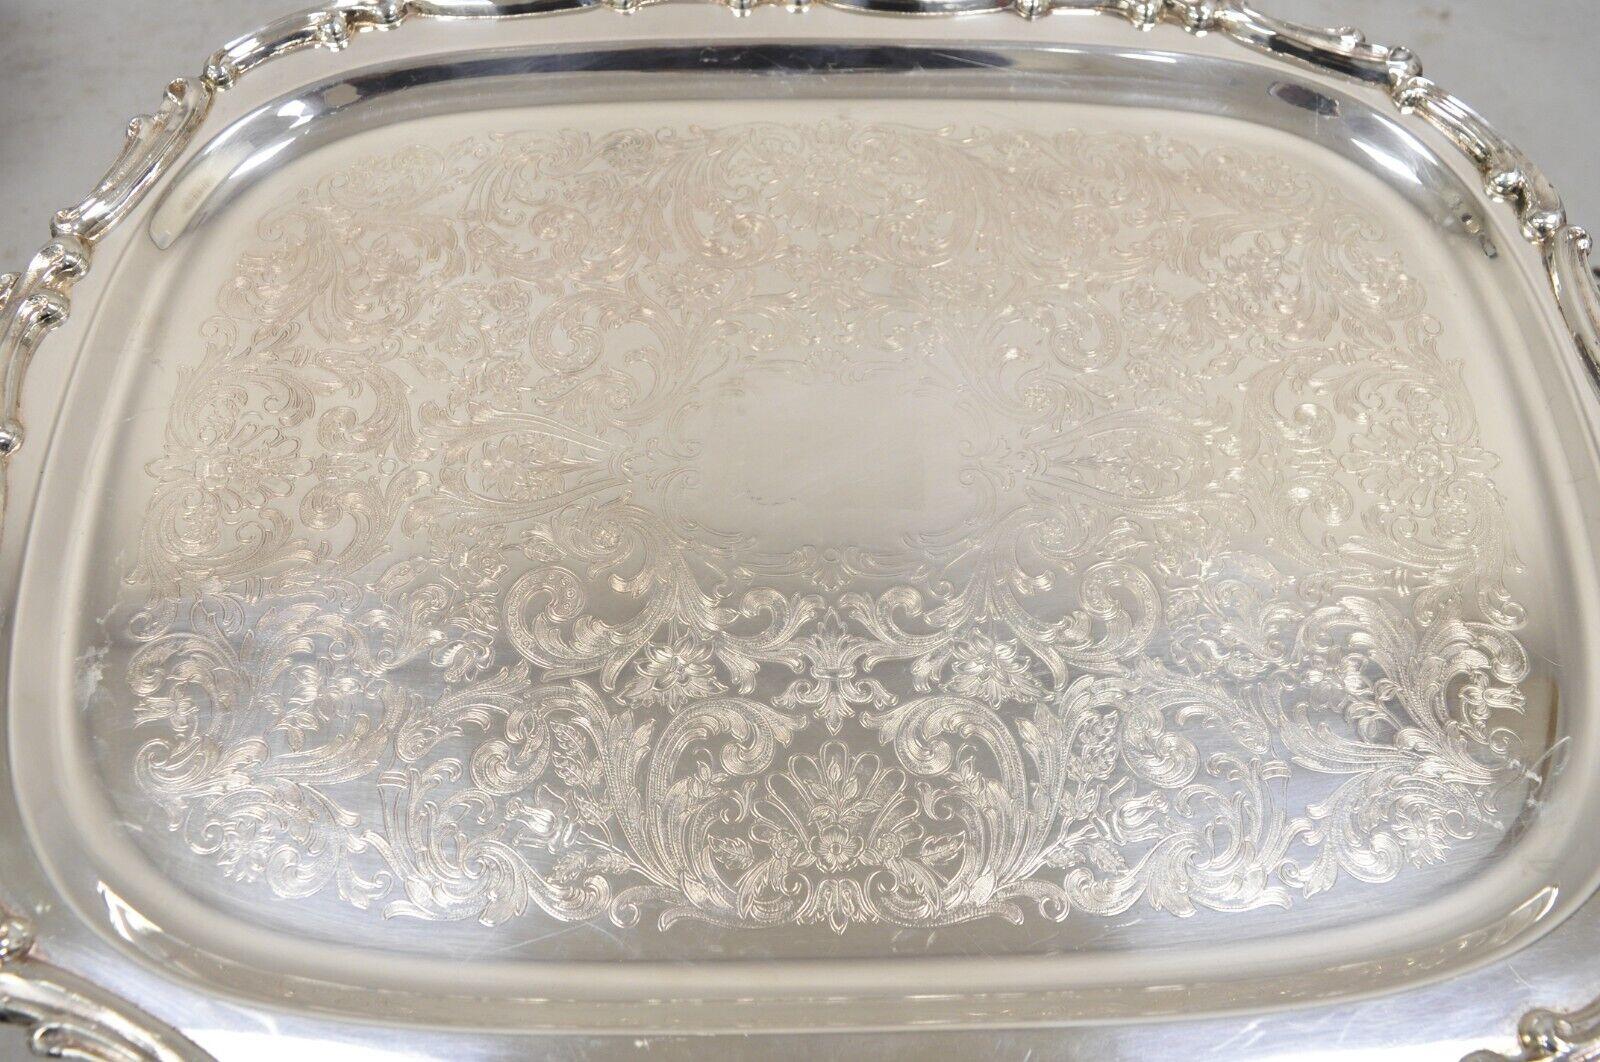 Vintage Leonard Regency Style Silver Plated Ornate Serving Platter Tray In Good Condition For Sale In Philadelphia, PA